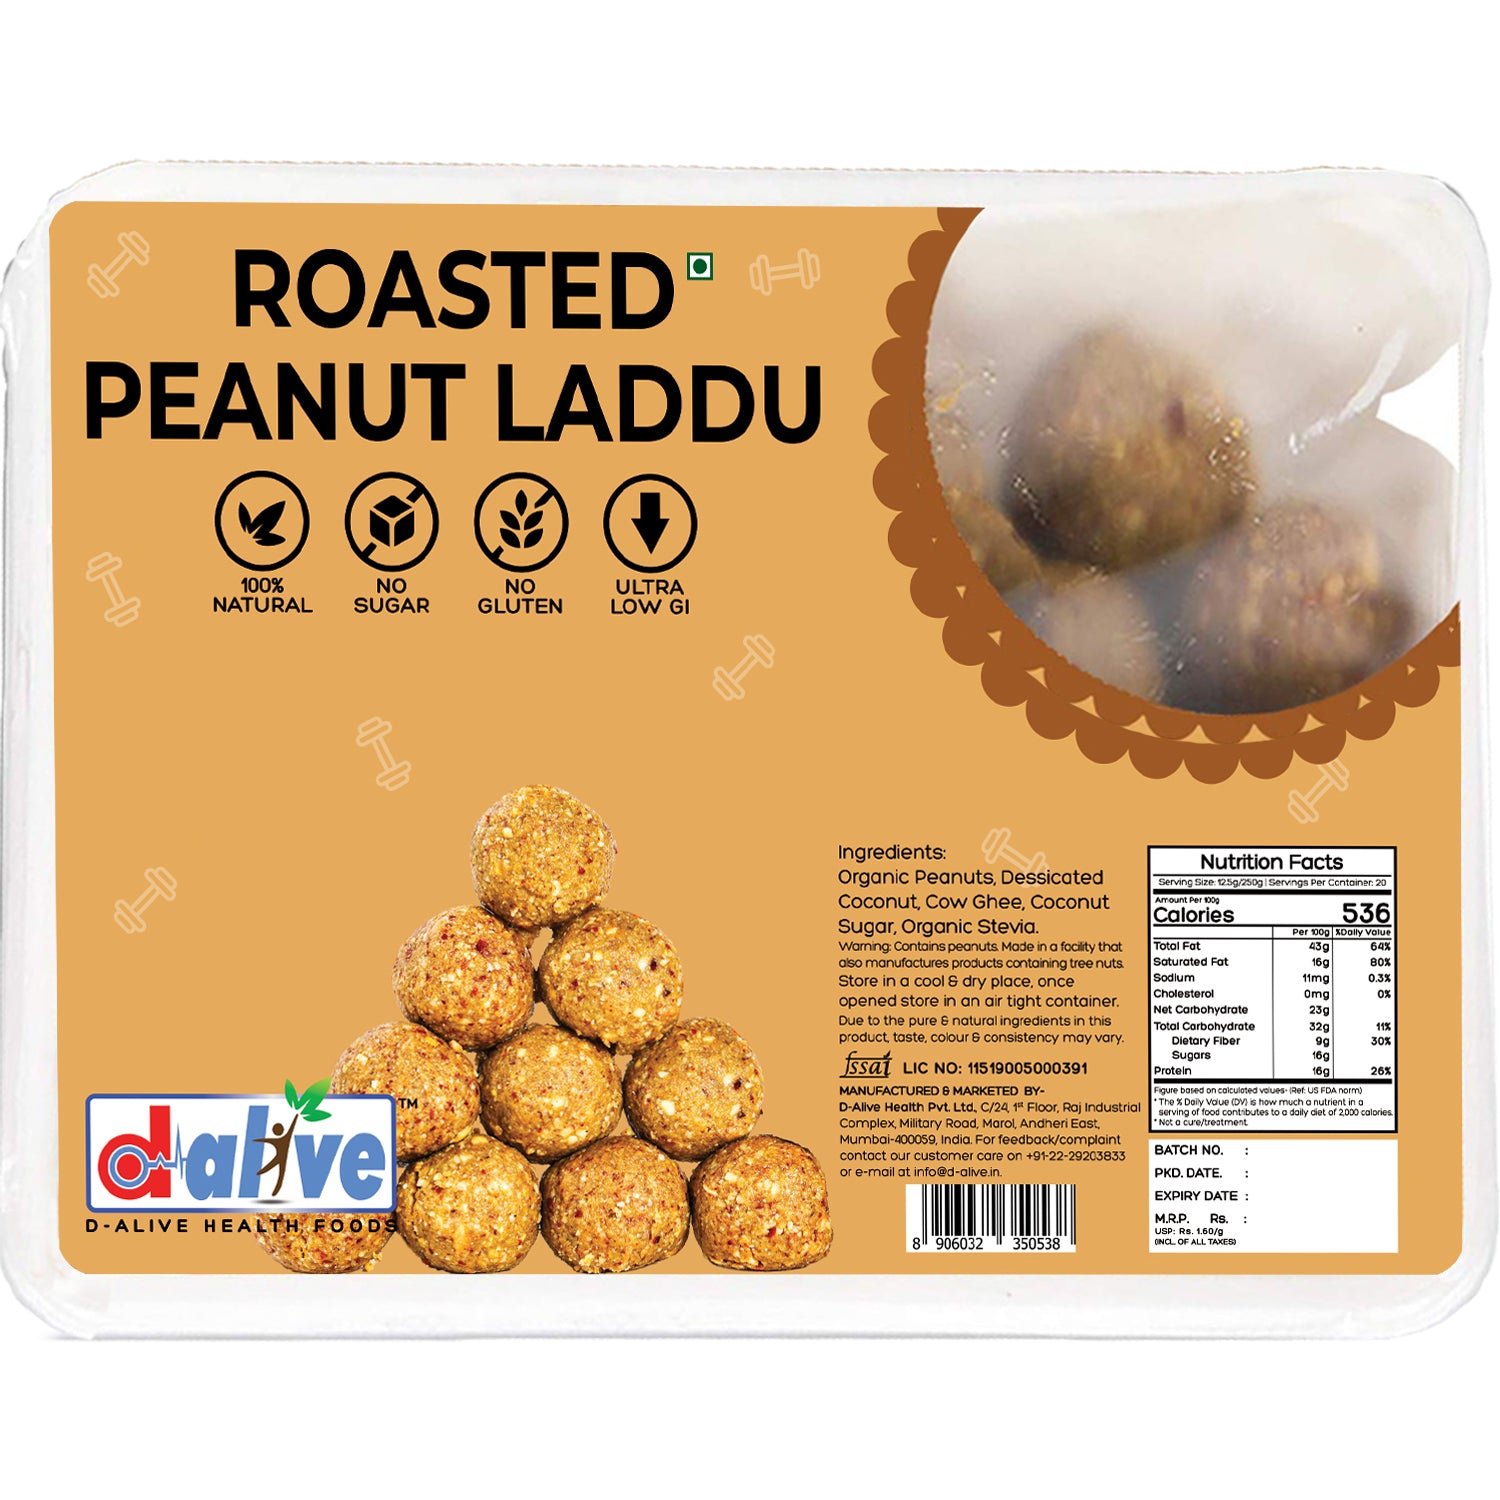 D-Alive Roasted Peanut Laddu/Ladoo - 250g (20 Servings) - (Sugar-Free, Low Carb, High Protein, Diabetes and Keto-Friendly) - Nutrient-Rich and Healthy Indian Sweets